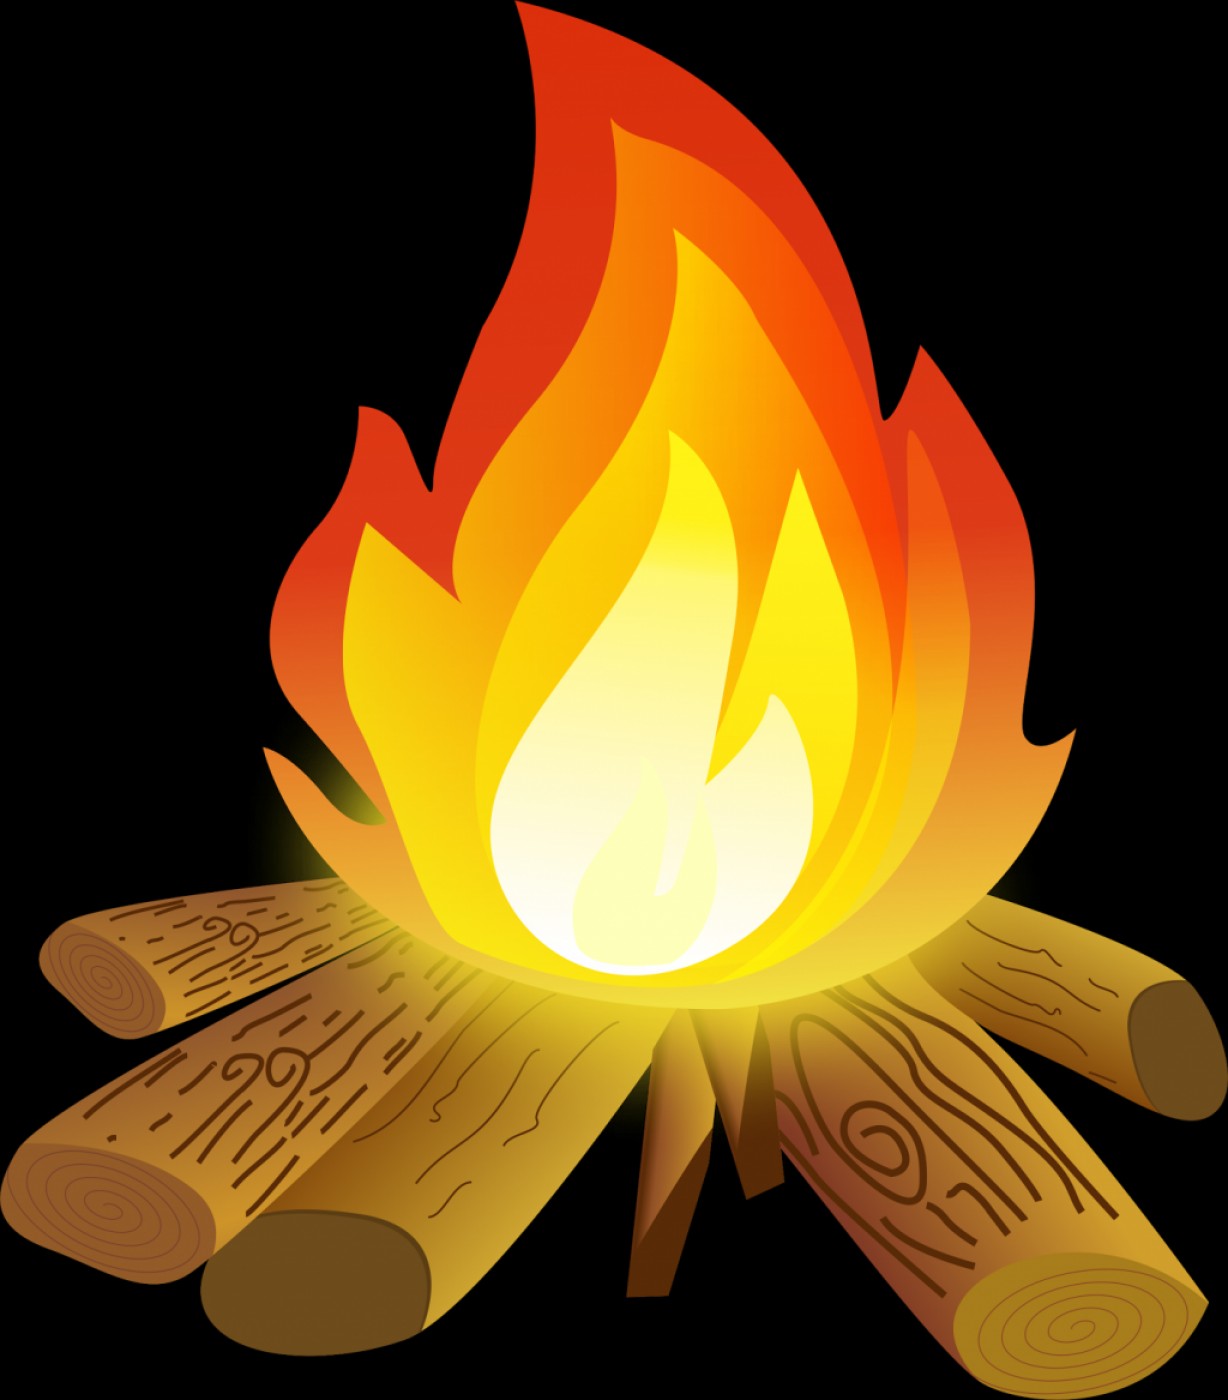 The best free Campfire vector images. Download from 85 free vectors of